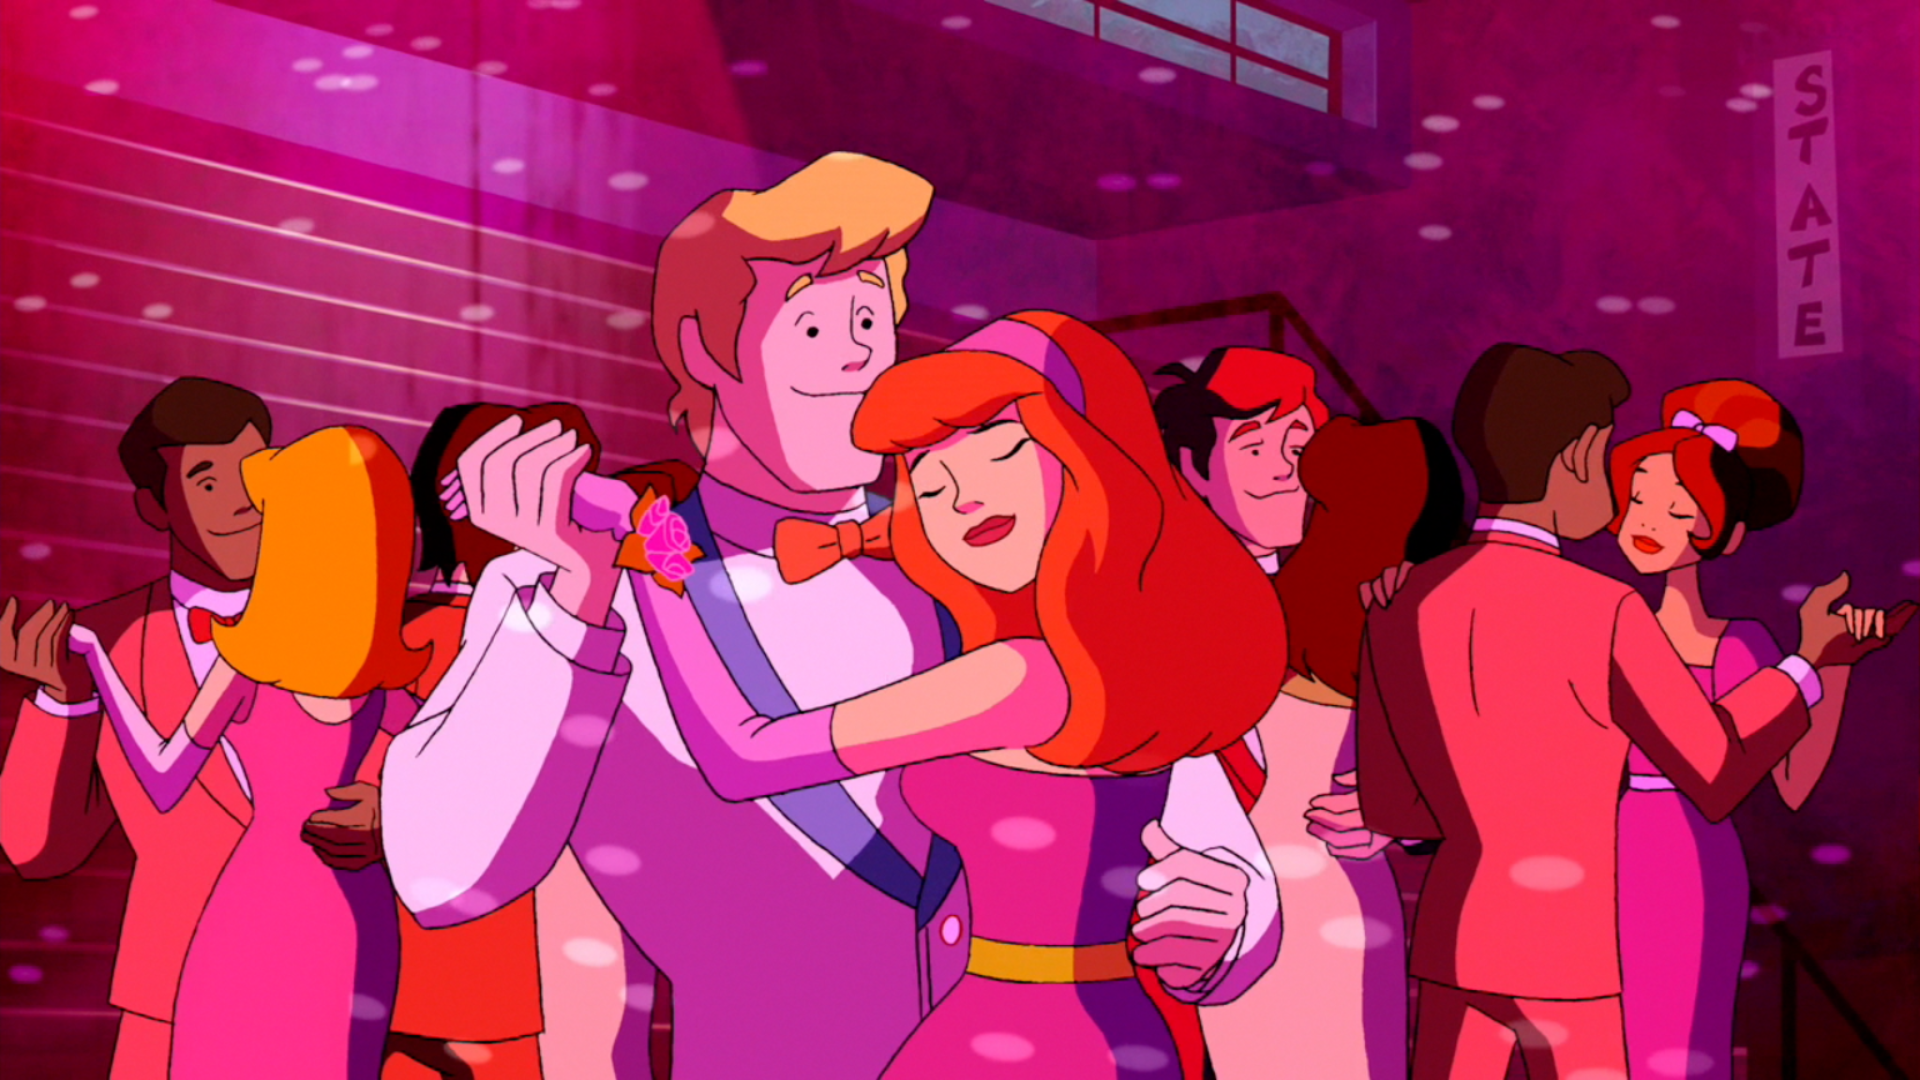 who is fred dating in scooby doo